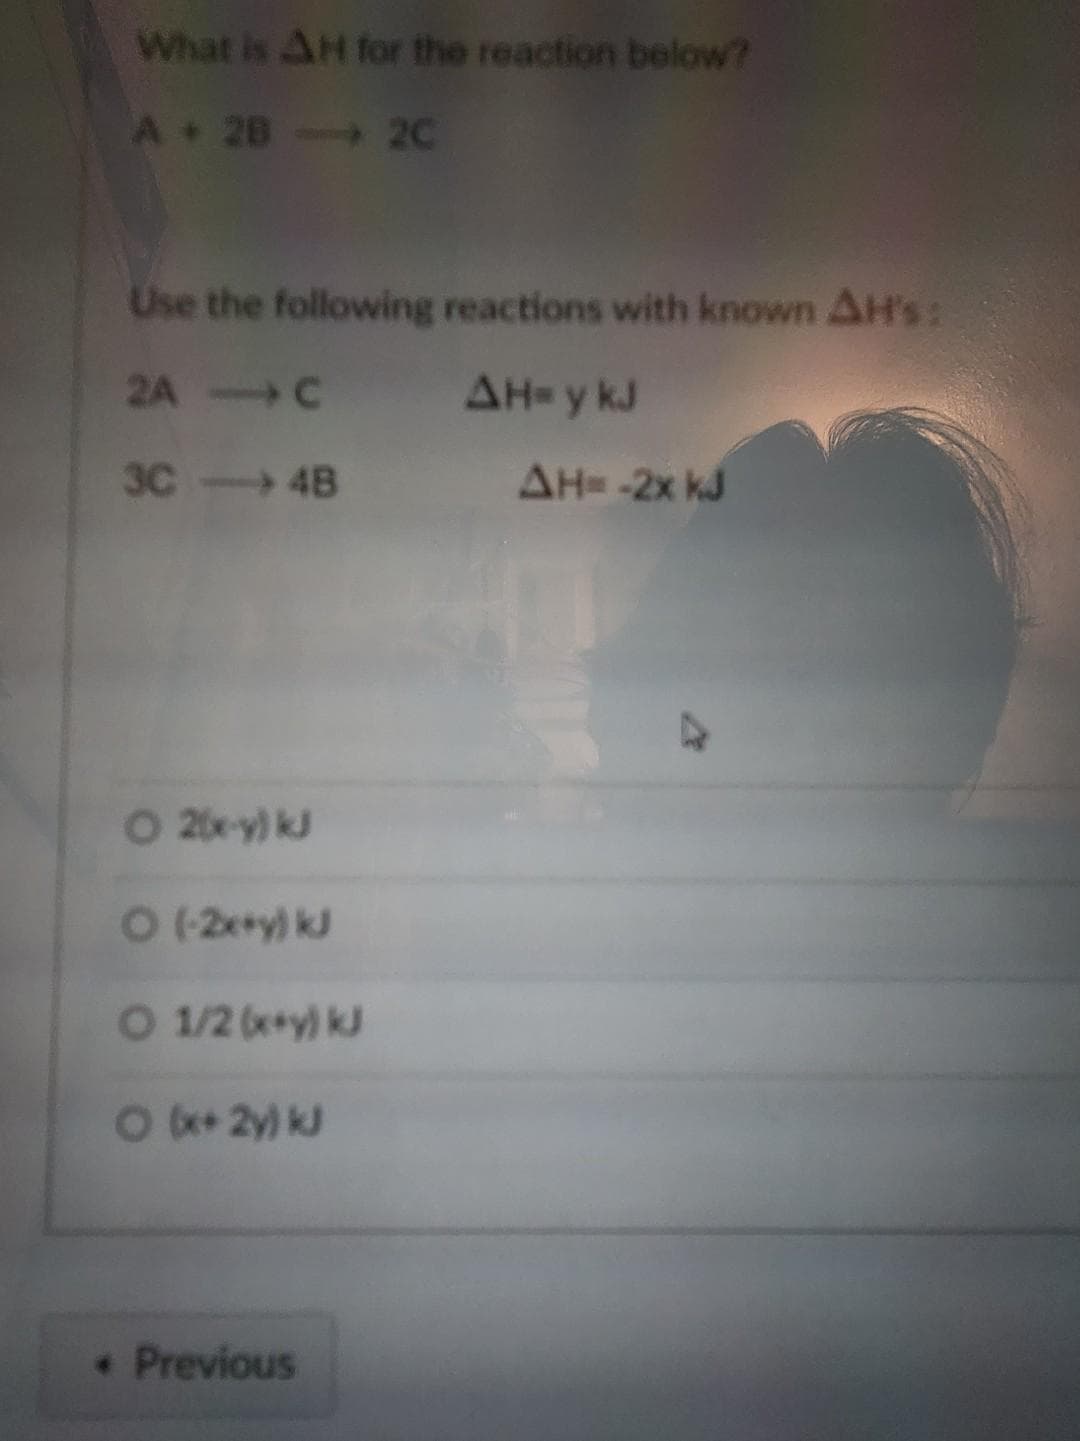 What is AH for the reaction below?
A 28
Use the following reactions with known AH's:
2A - C
AH=y kJ
3C-4B
O 2(x-y) kJ
O (-2x+y) kJ
O 1/2 (x+y) k
○ (x+ 2y) kJ
2C
* Previous
AH = -2x kJ